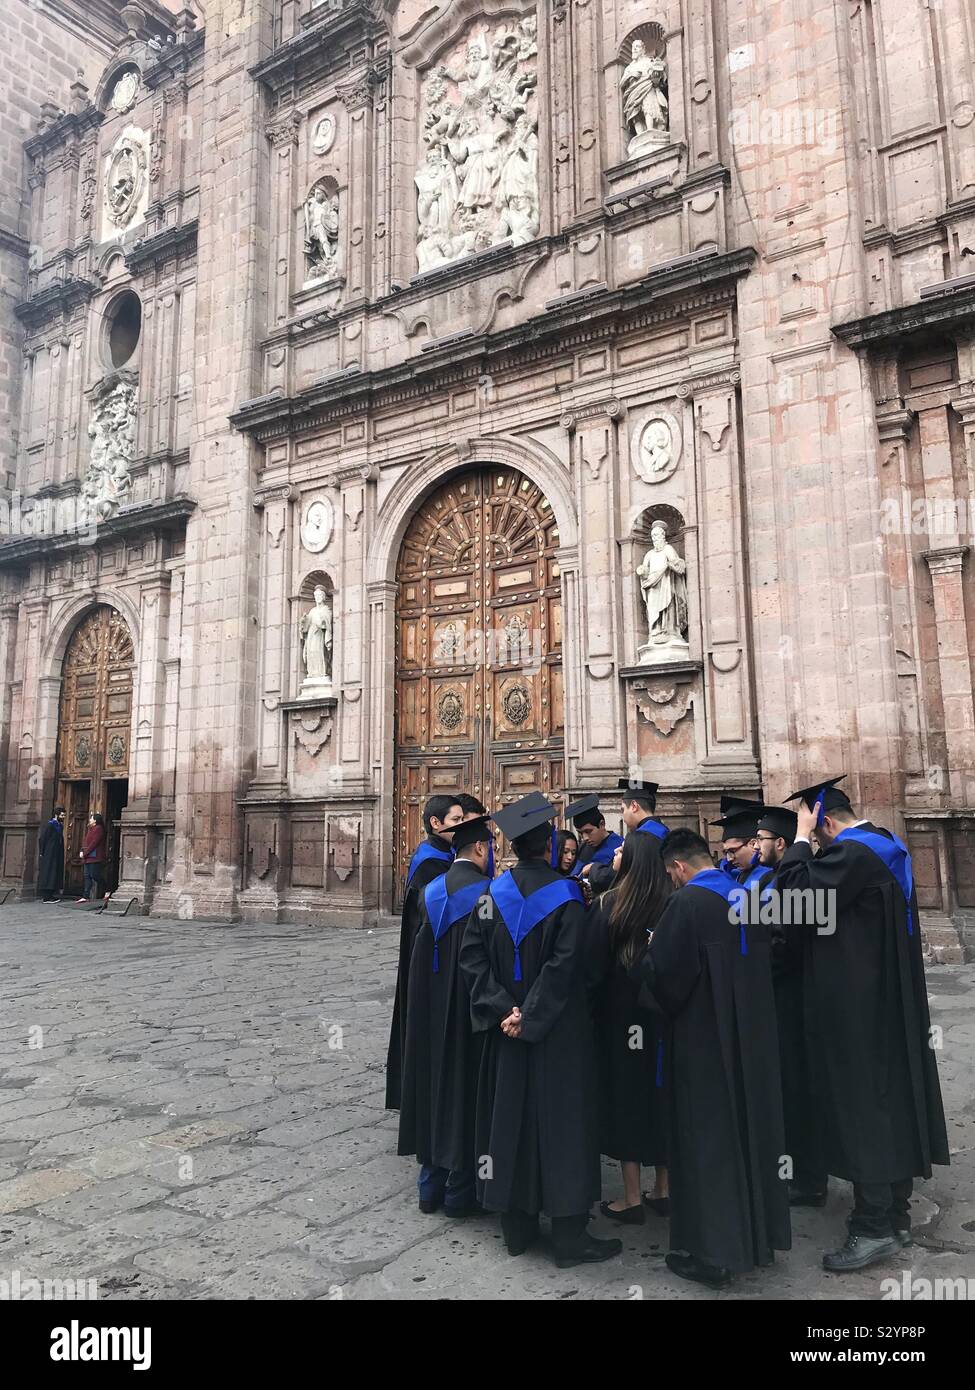 Graduates of the Universidad Michoacana de San Nicolas de Hidalgo gather in their caps and gowns outside the cathedral in Morelia, Mexico, on graduation day. Stock Photo